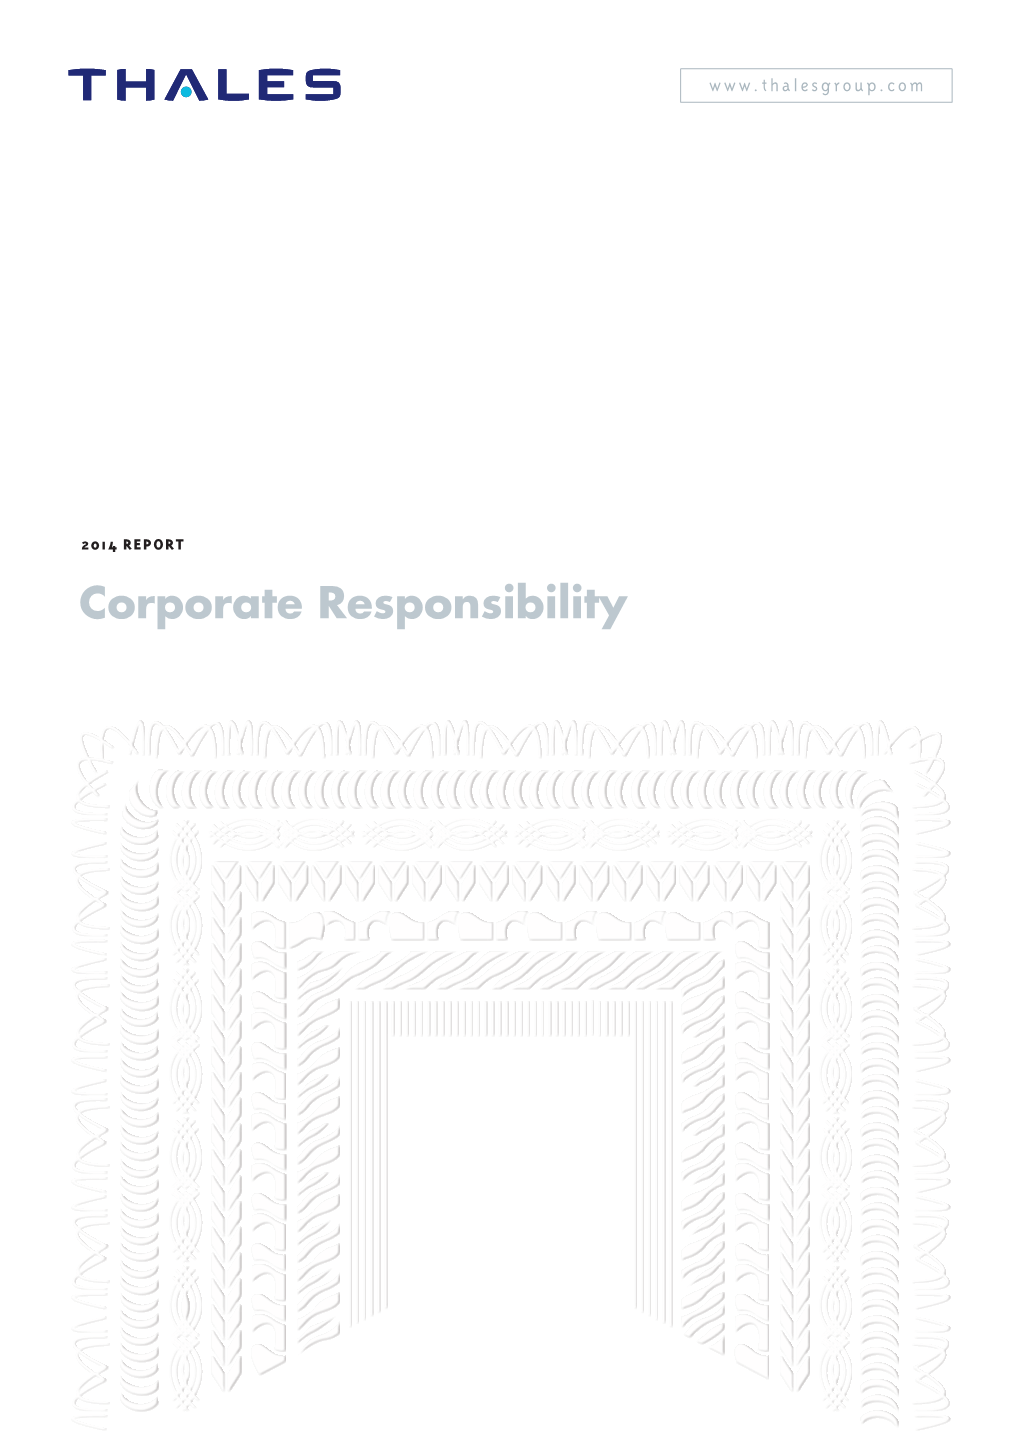 2014 Report Corporate Responsibility Thales